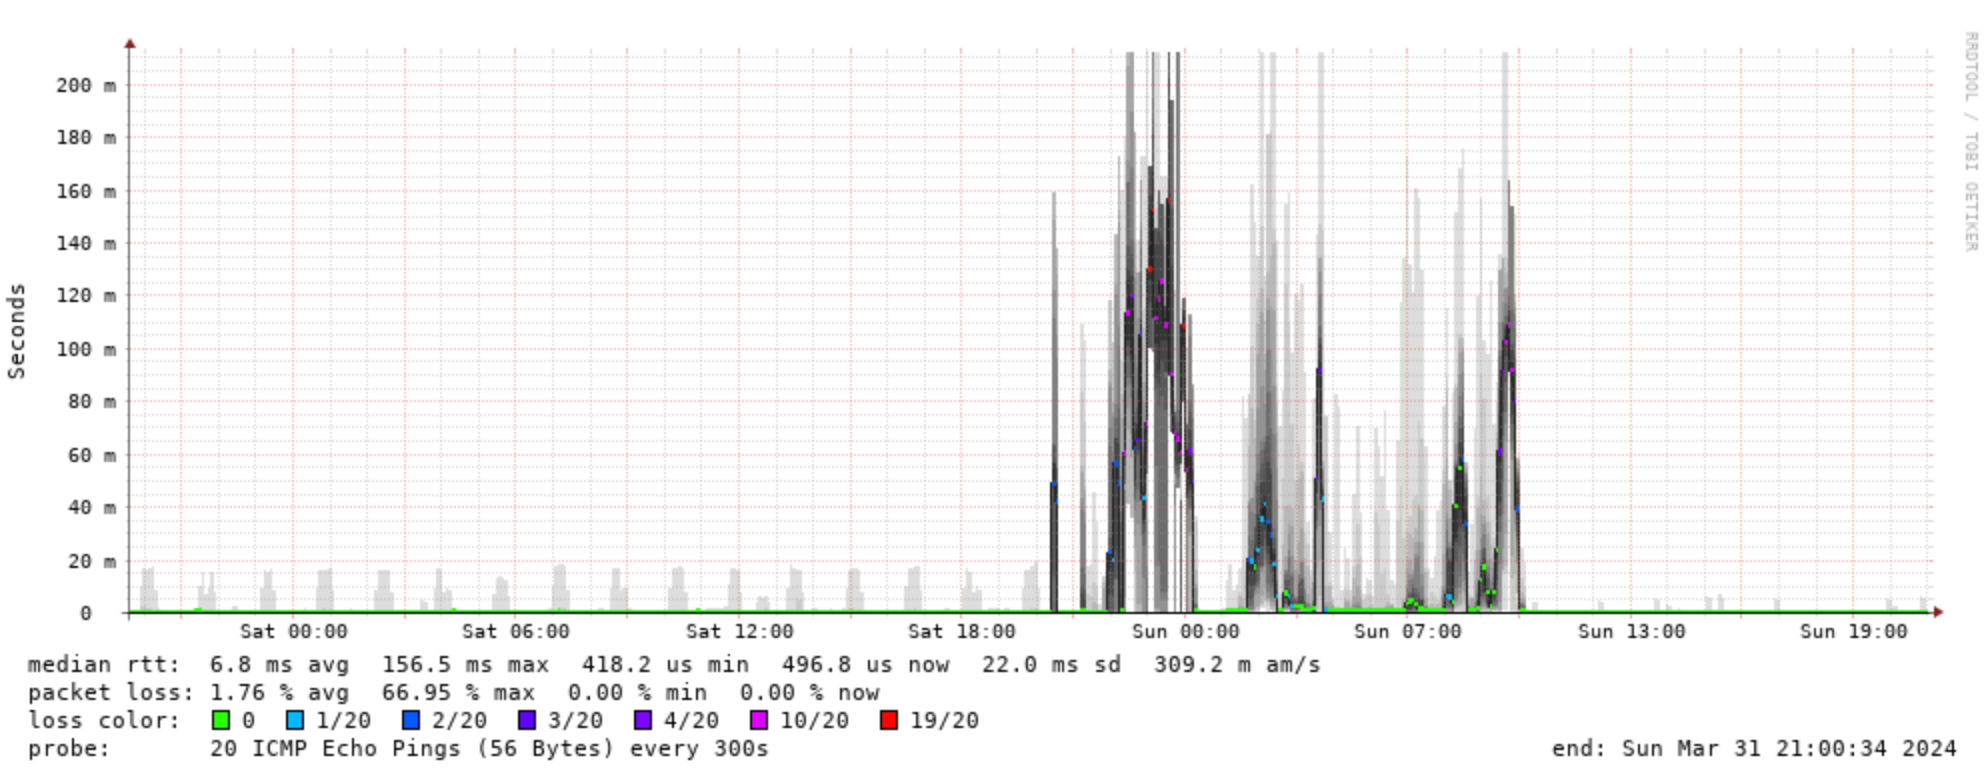 Smokeping graph showing the latency to the router on my LAN going haywire